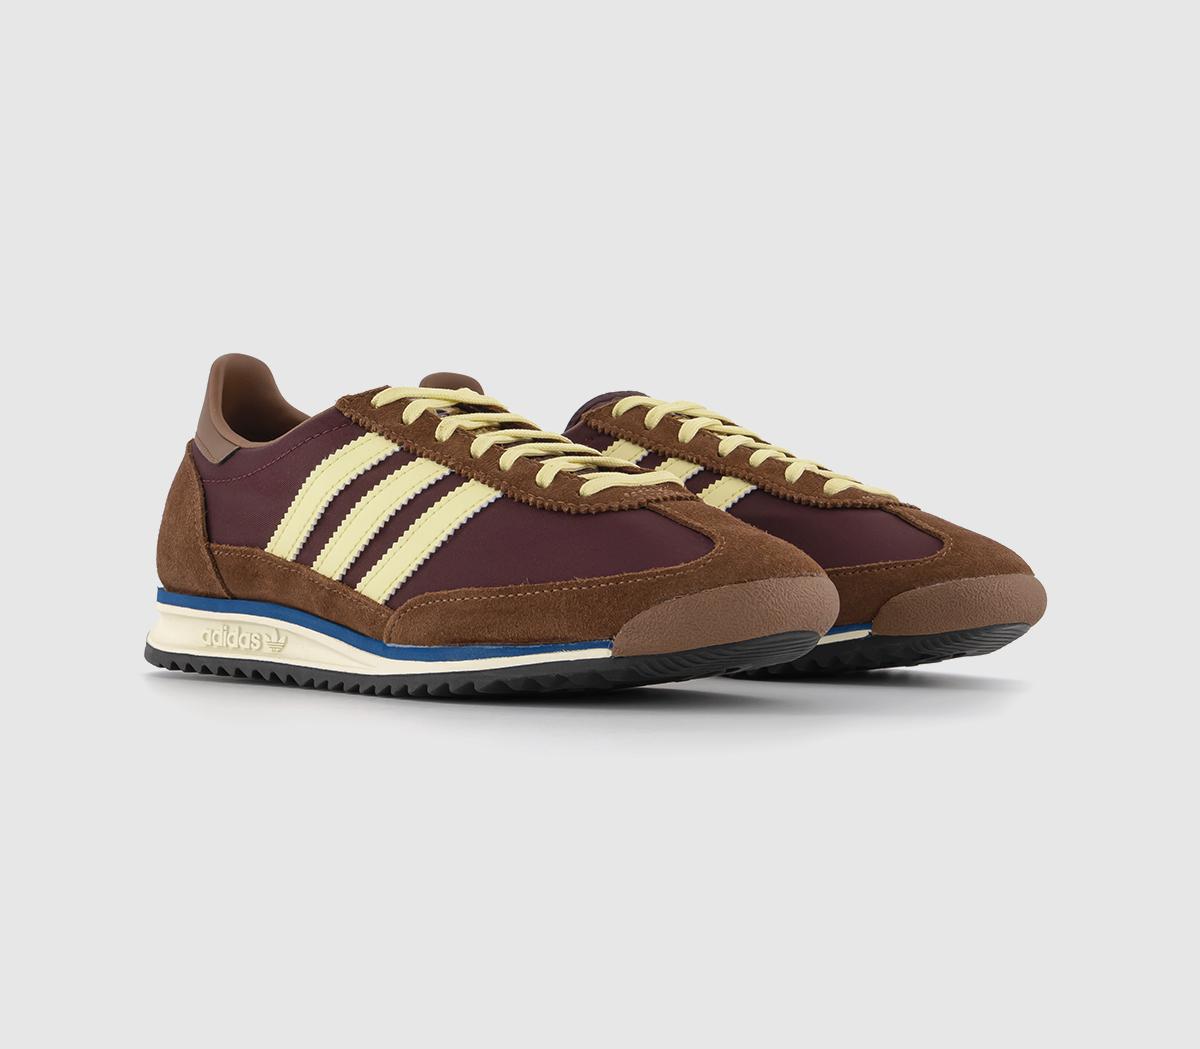 Adidas Womens SL 72 Trainers Maroon Almost Yellow Preloved Brown, 3.5